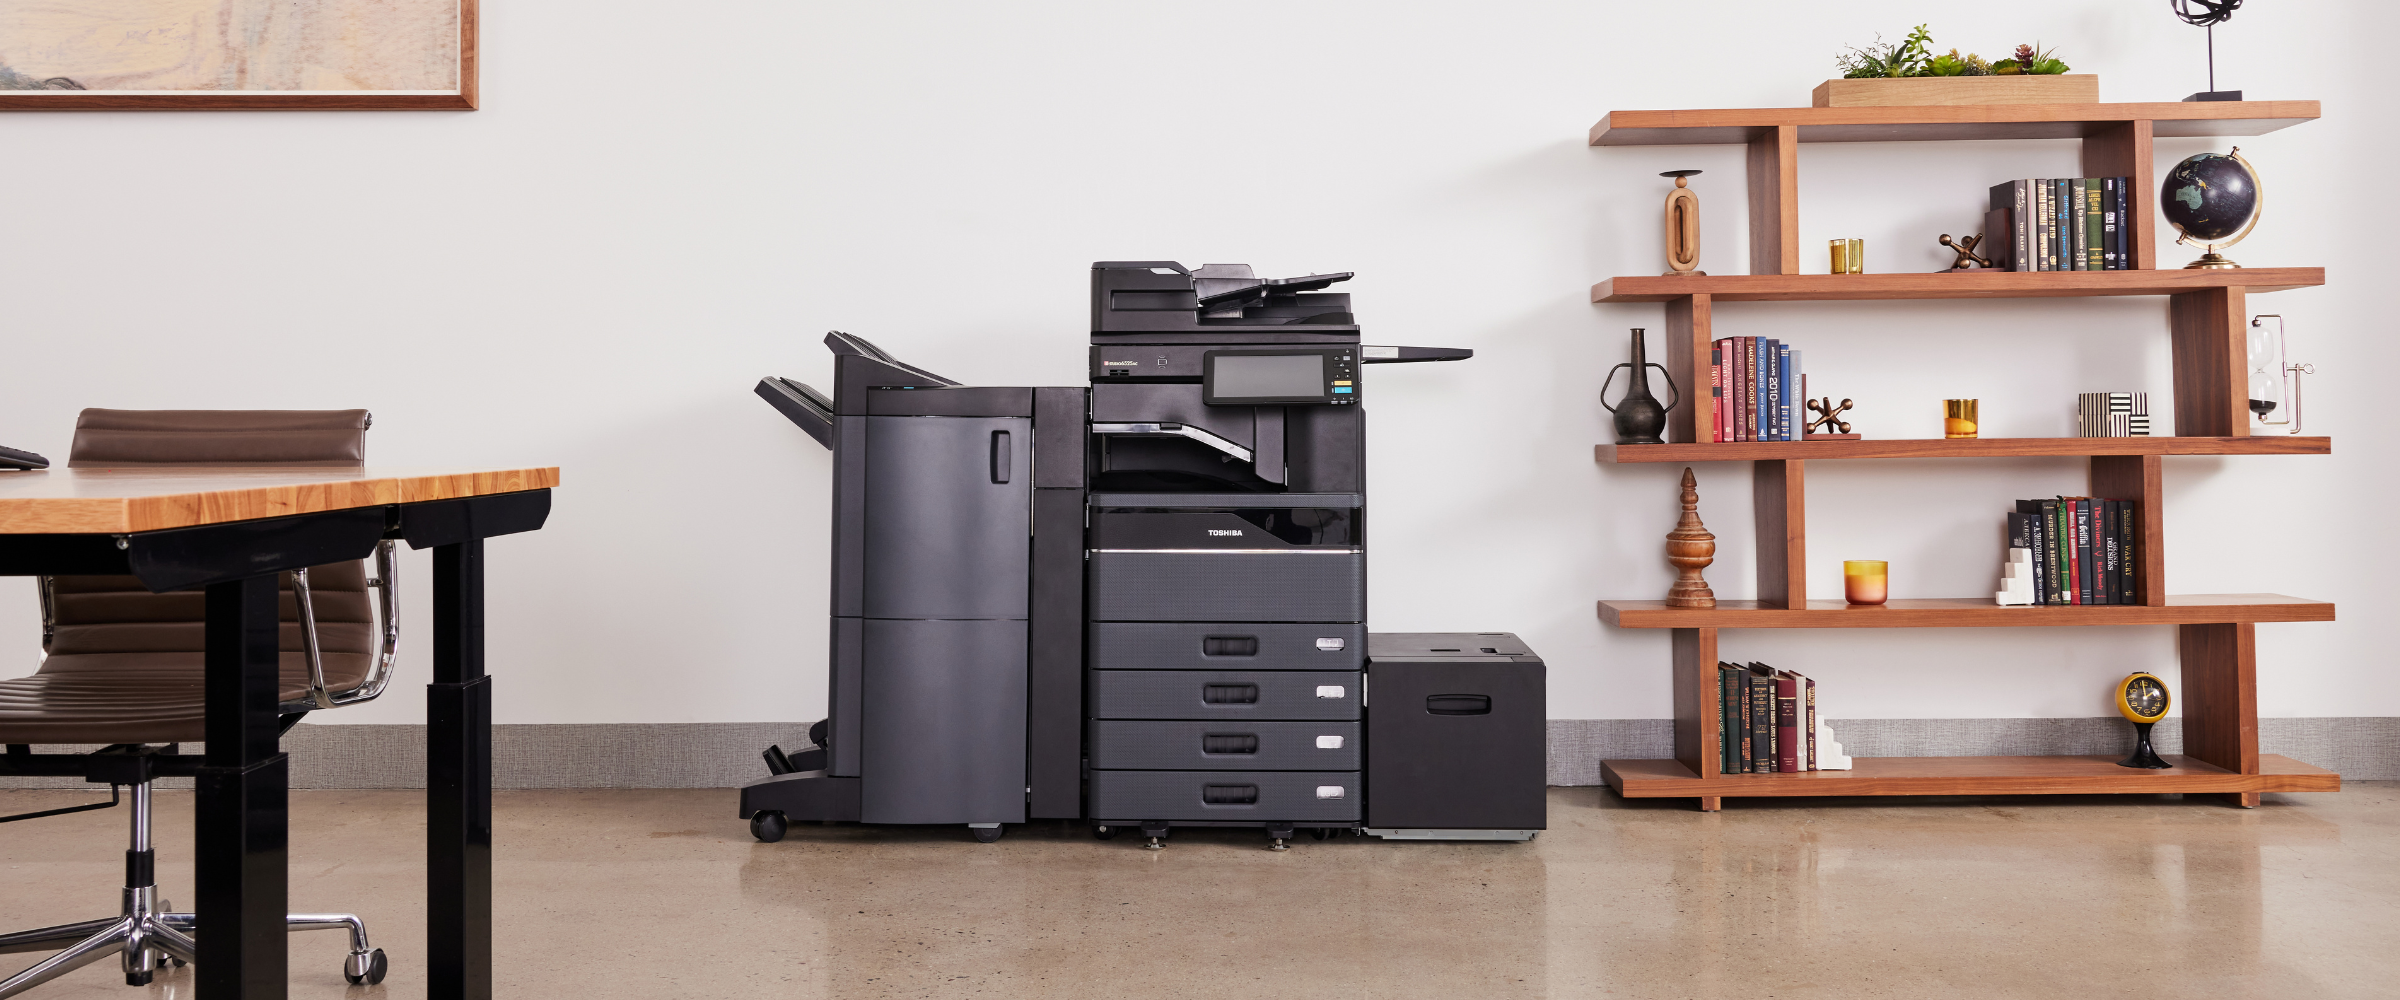 Toshiba MFP in office setting